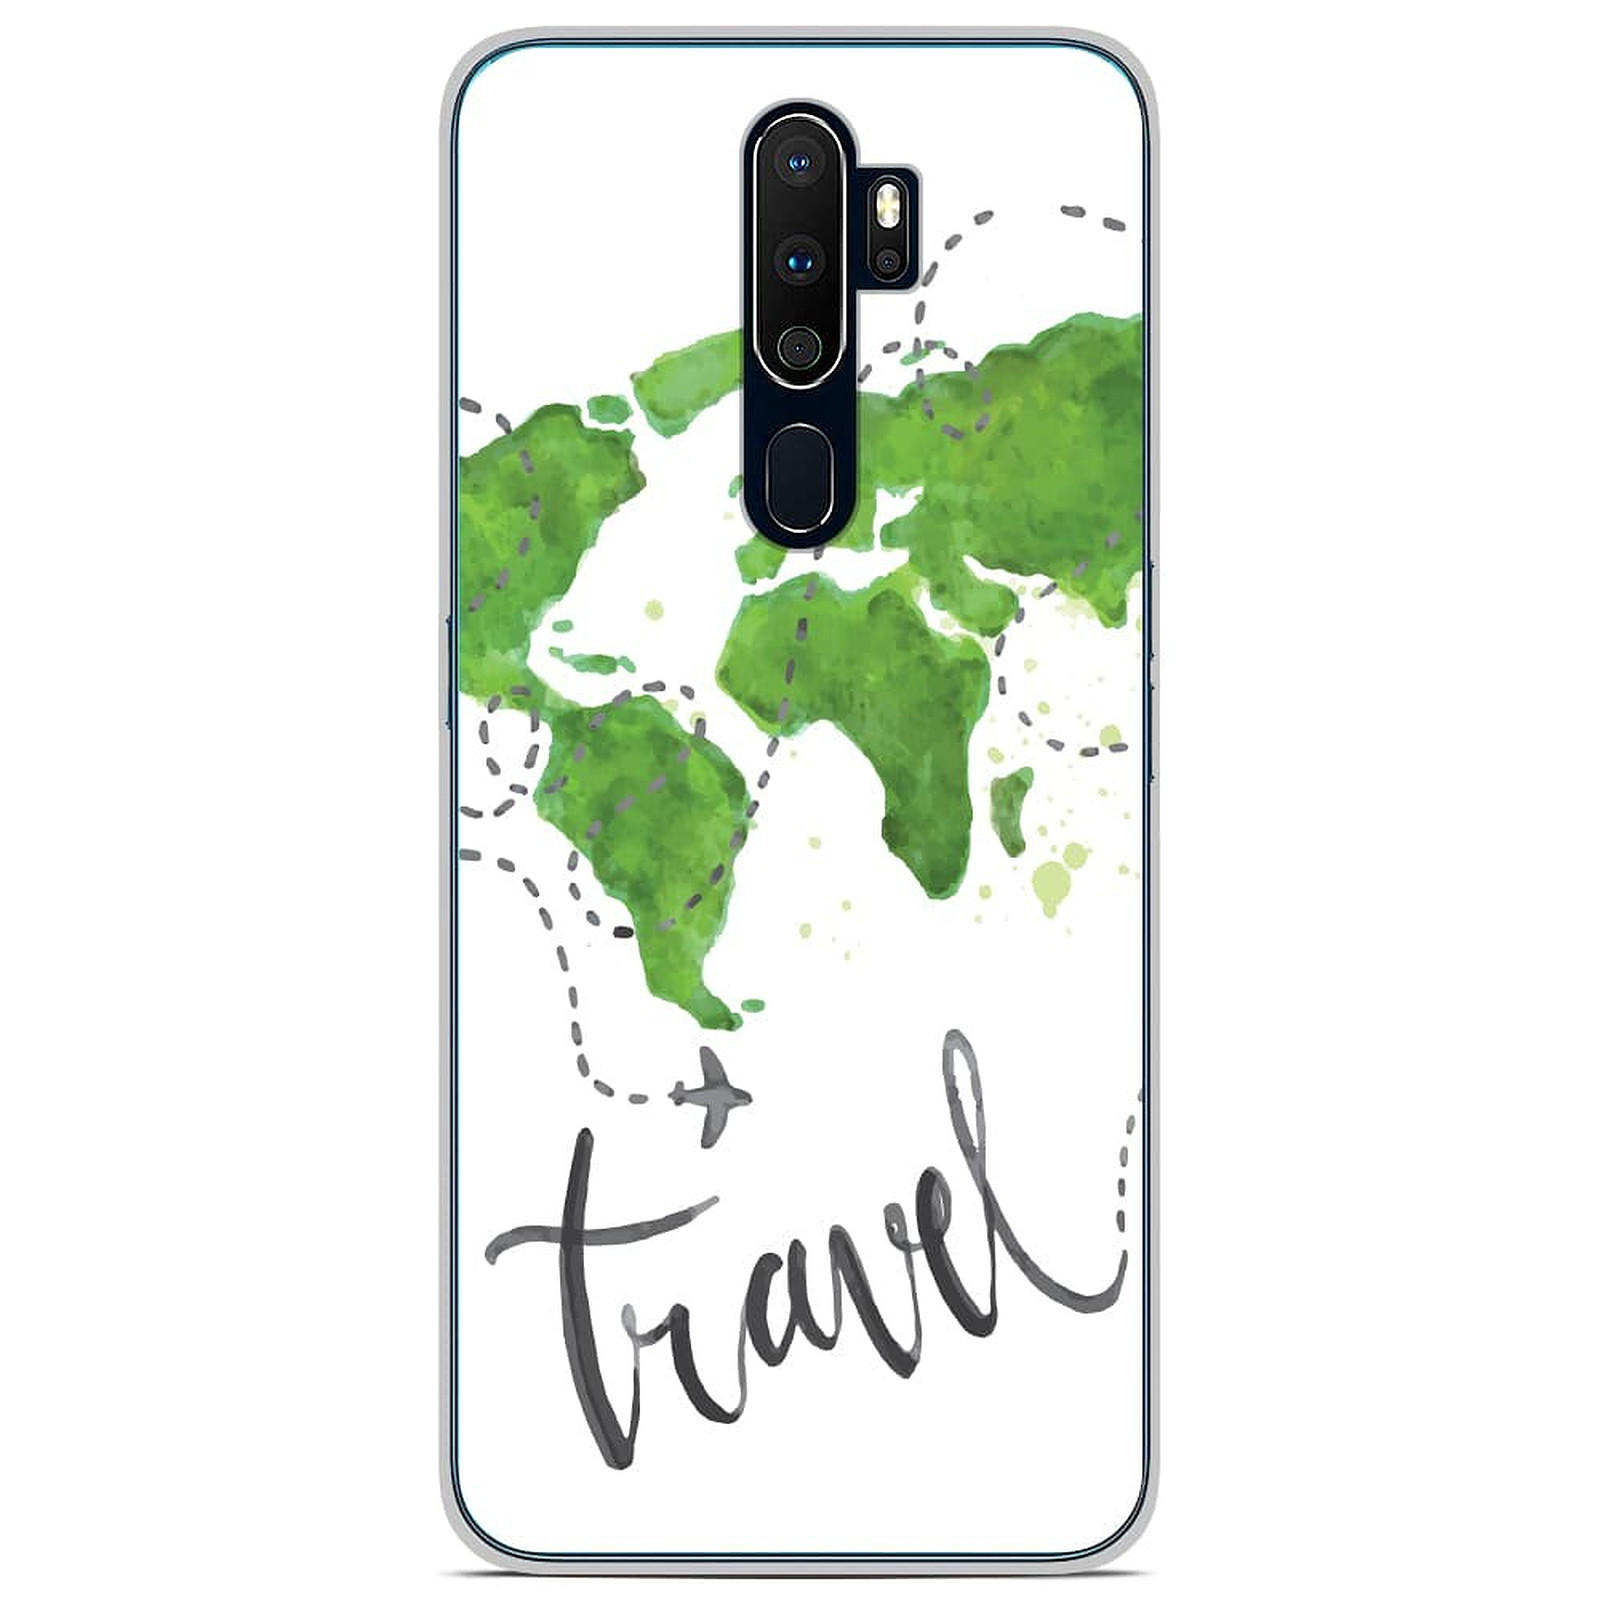 1001 Coques Coque silicone gel Oppo A5 2020 motif Map Travel - Coque telephone 1001Coques